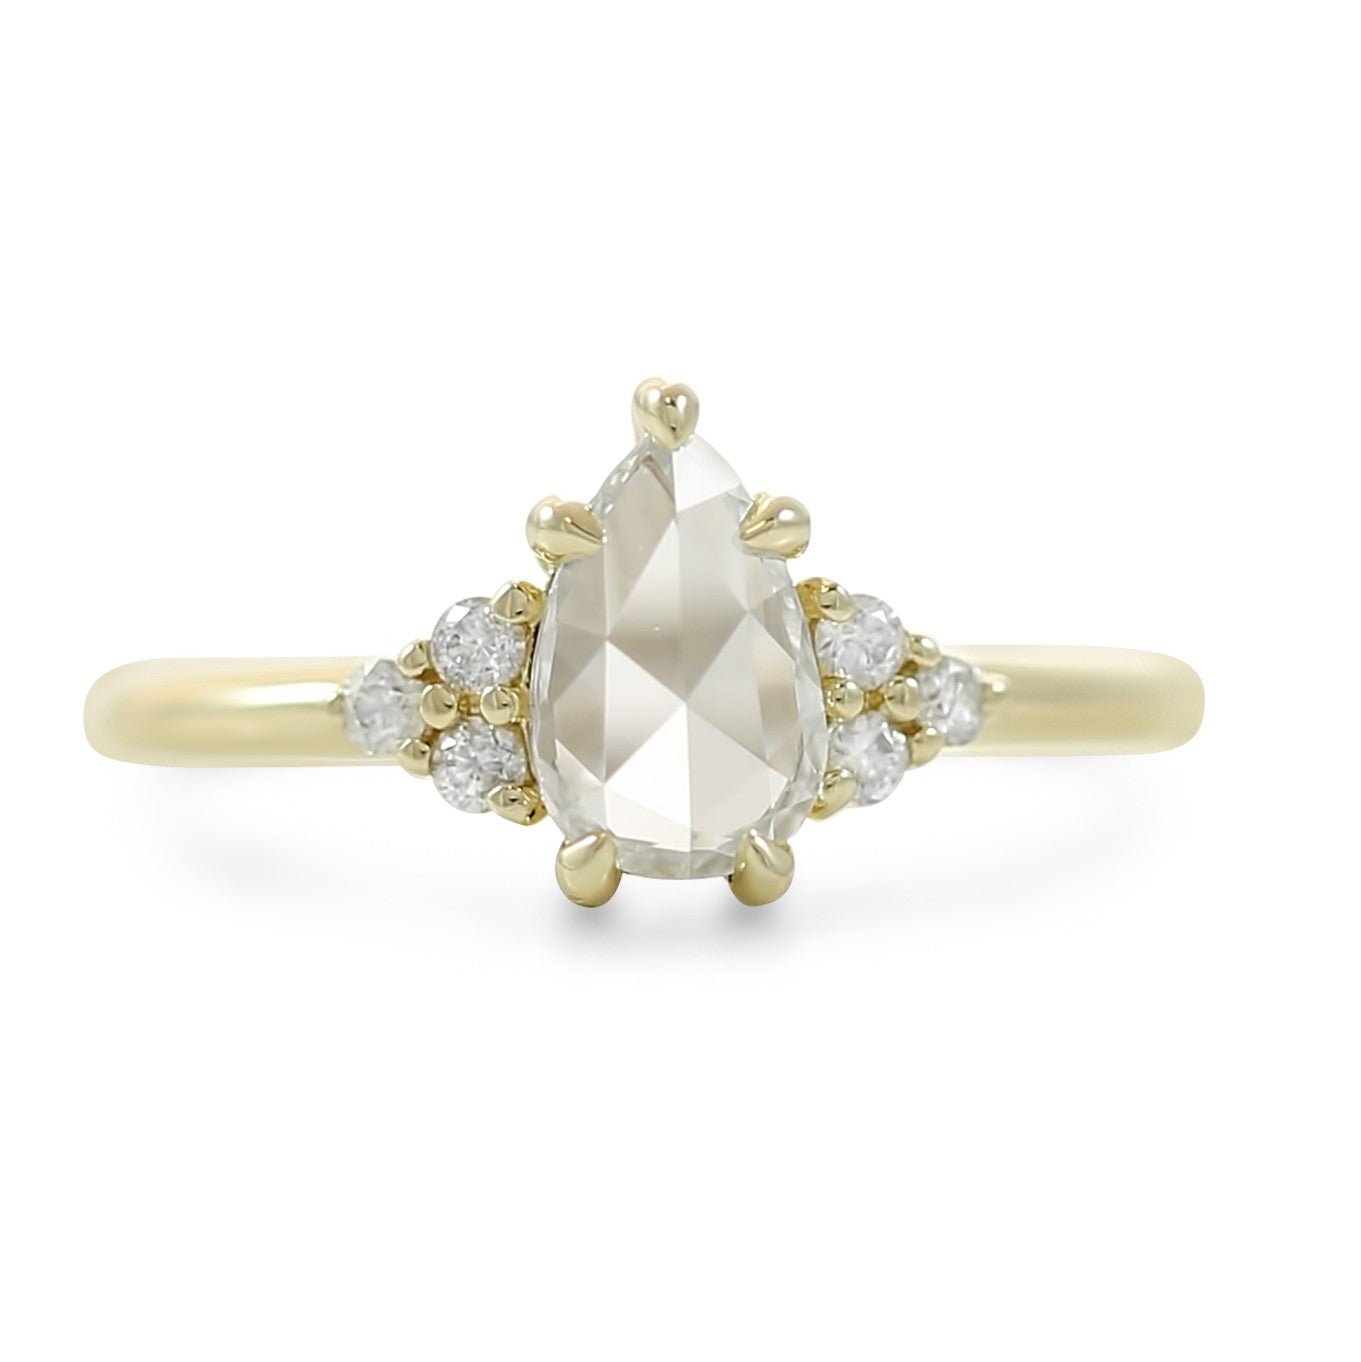 14k yellow gold rose cut pear diamond engagement ring with round diamond cluster side stones